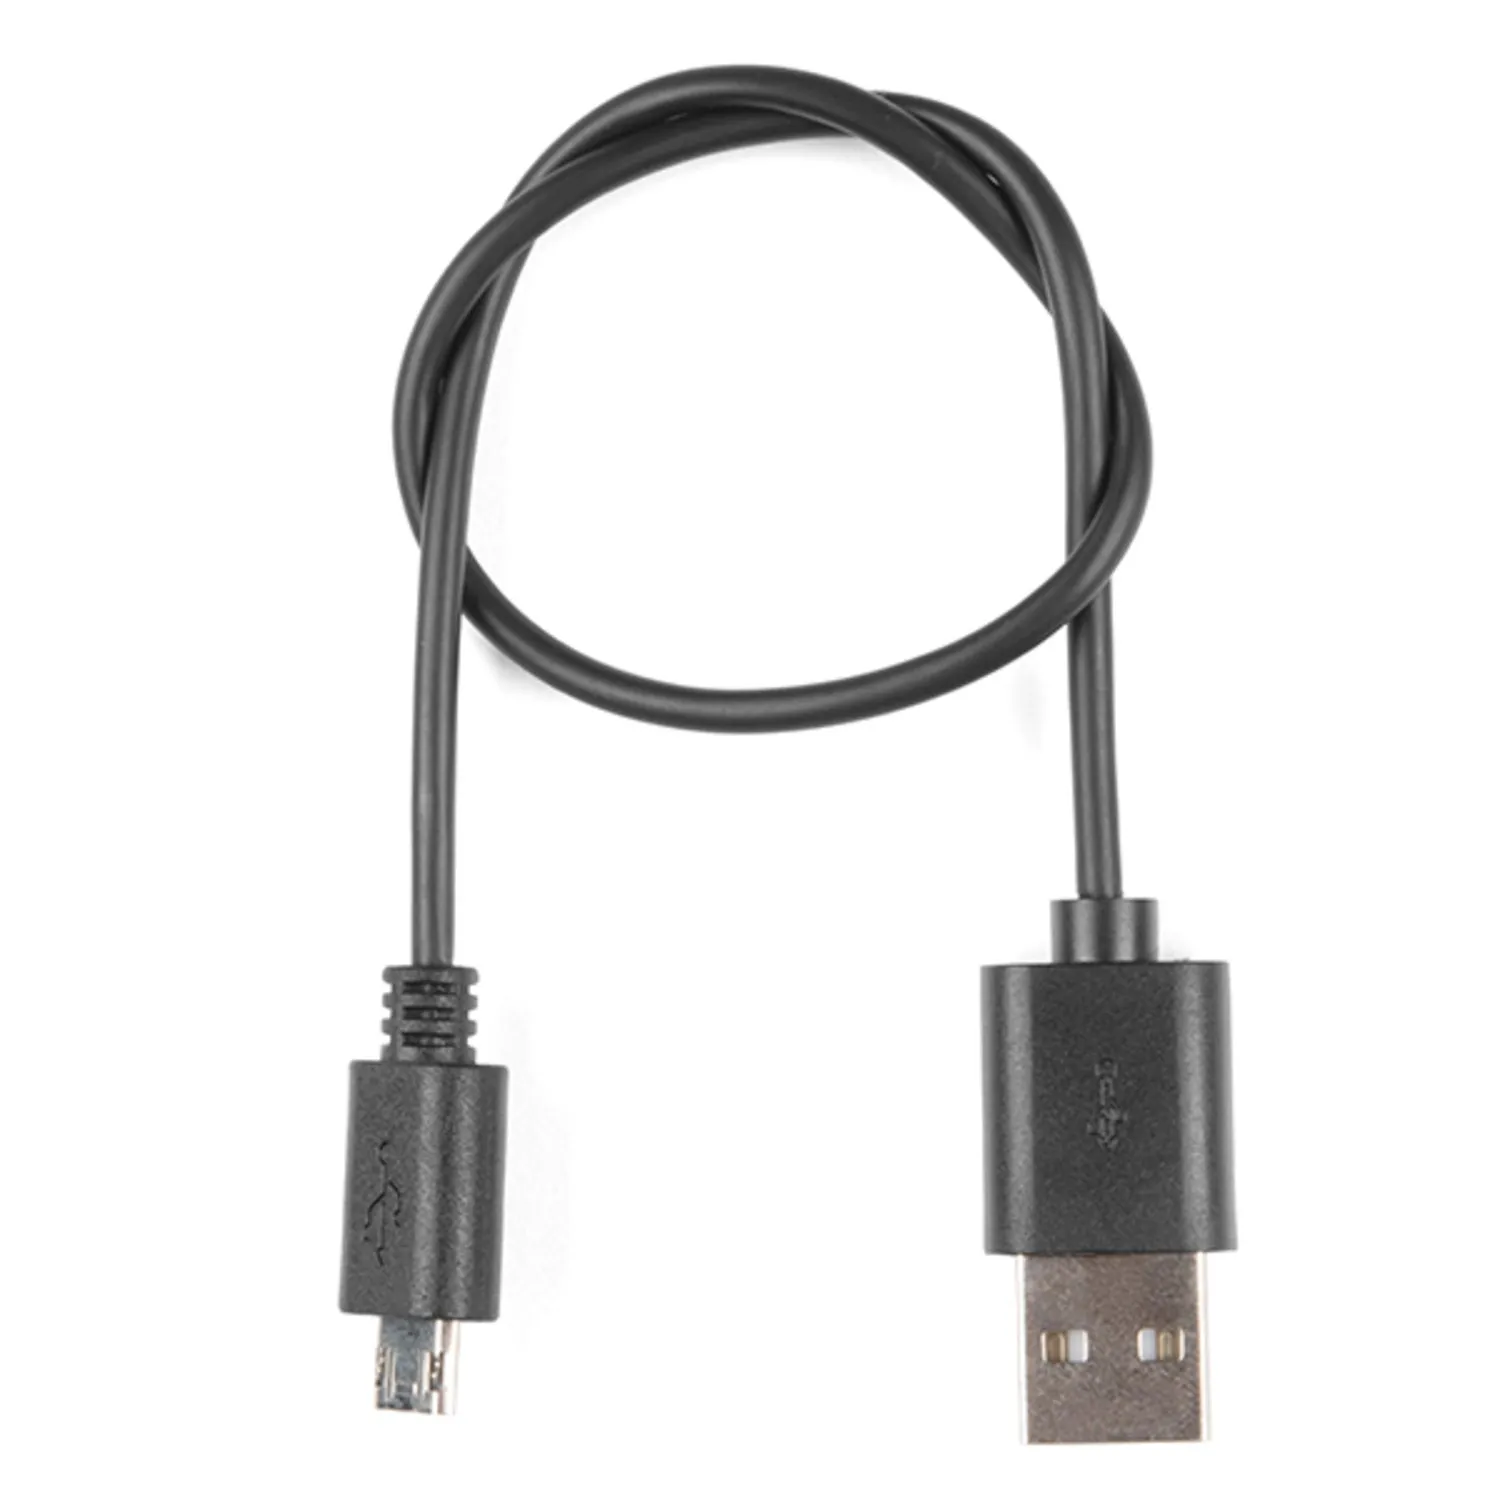 Photo of Reversible USB A to Reversible Micro-B Cable - 0.3m